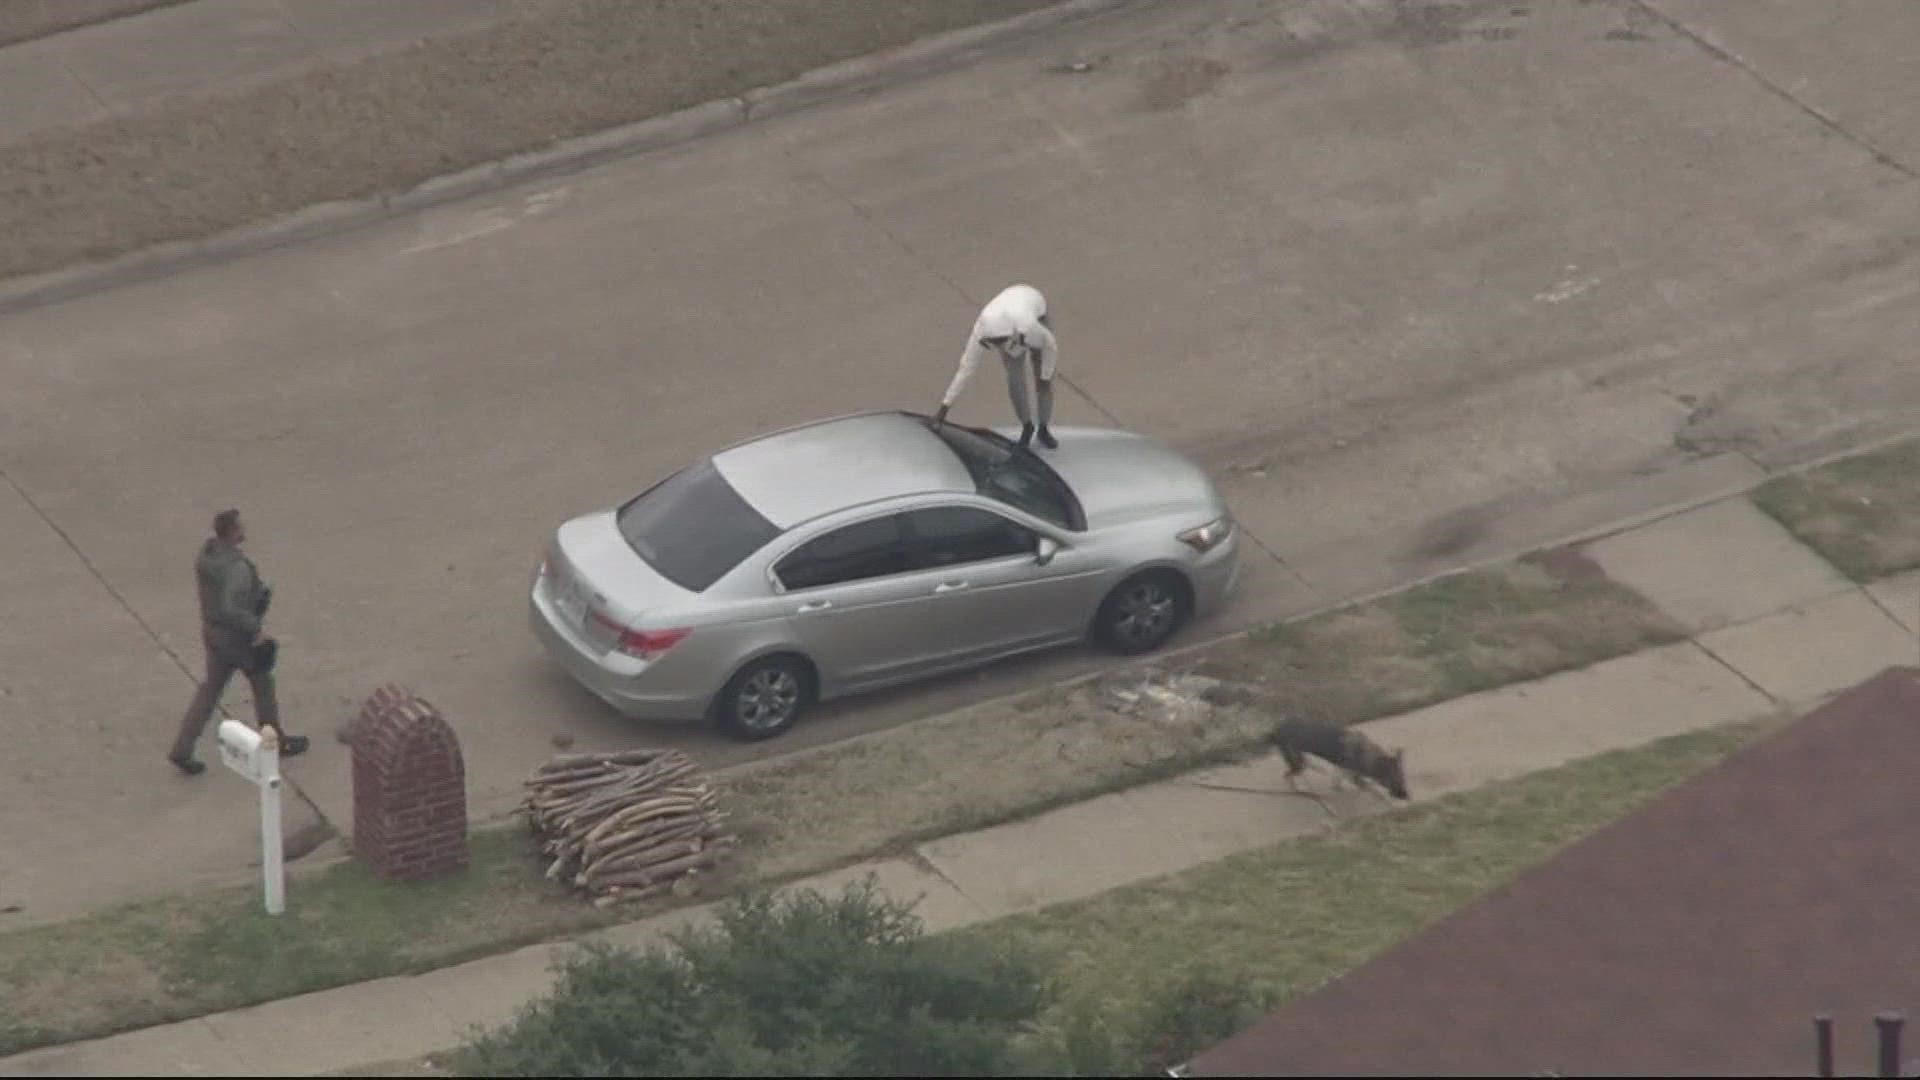 Authorities took a chase suspect into custody after a car and foot pursuit through Dallas County on Monday afternoon, officials say